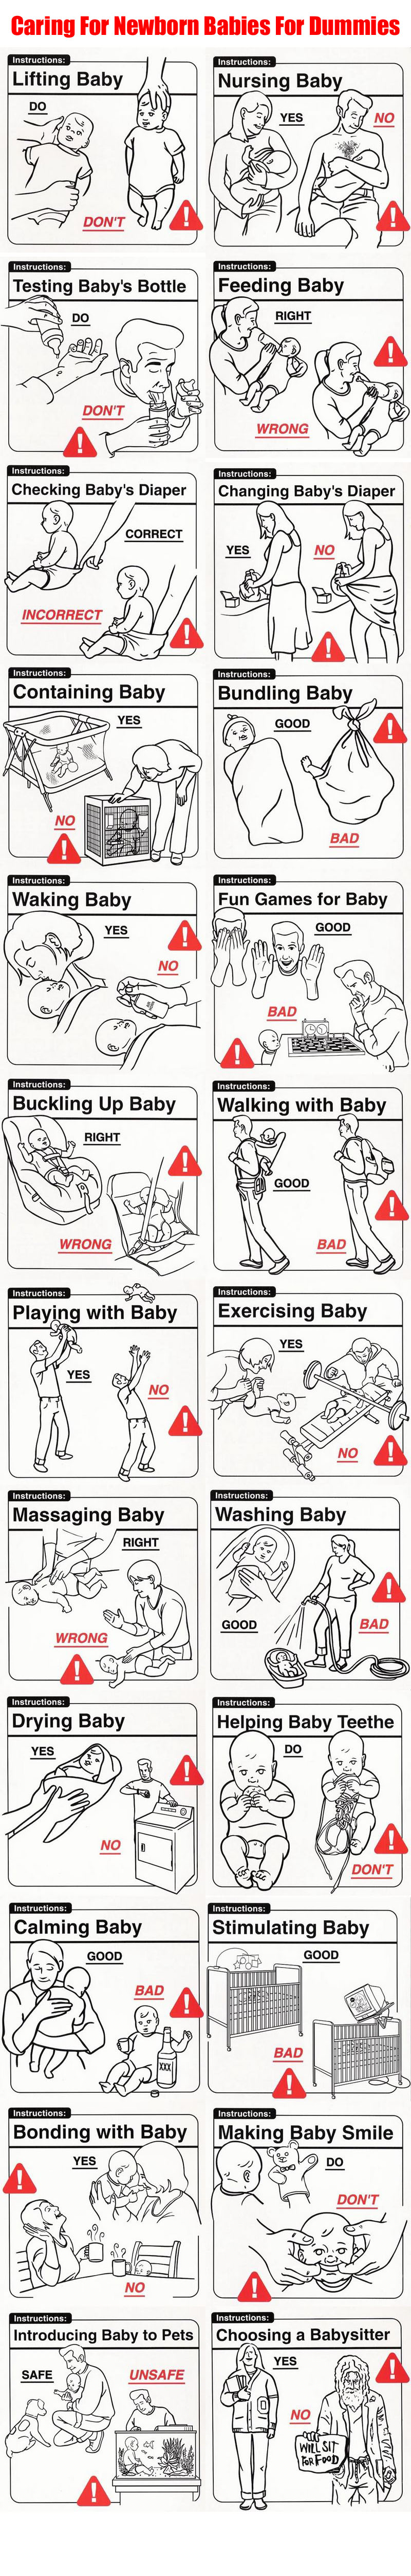 Caring For Newborn Babies For Dummies